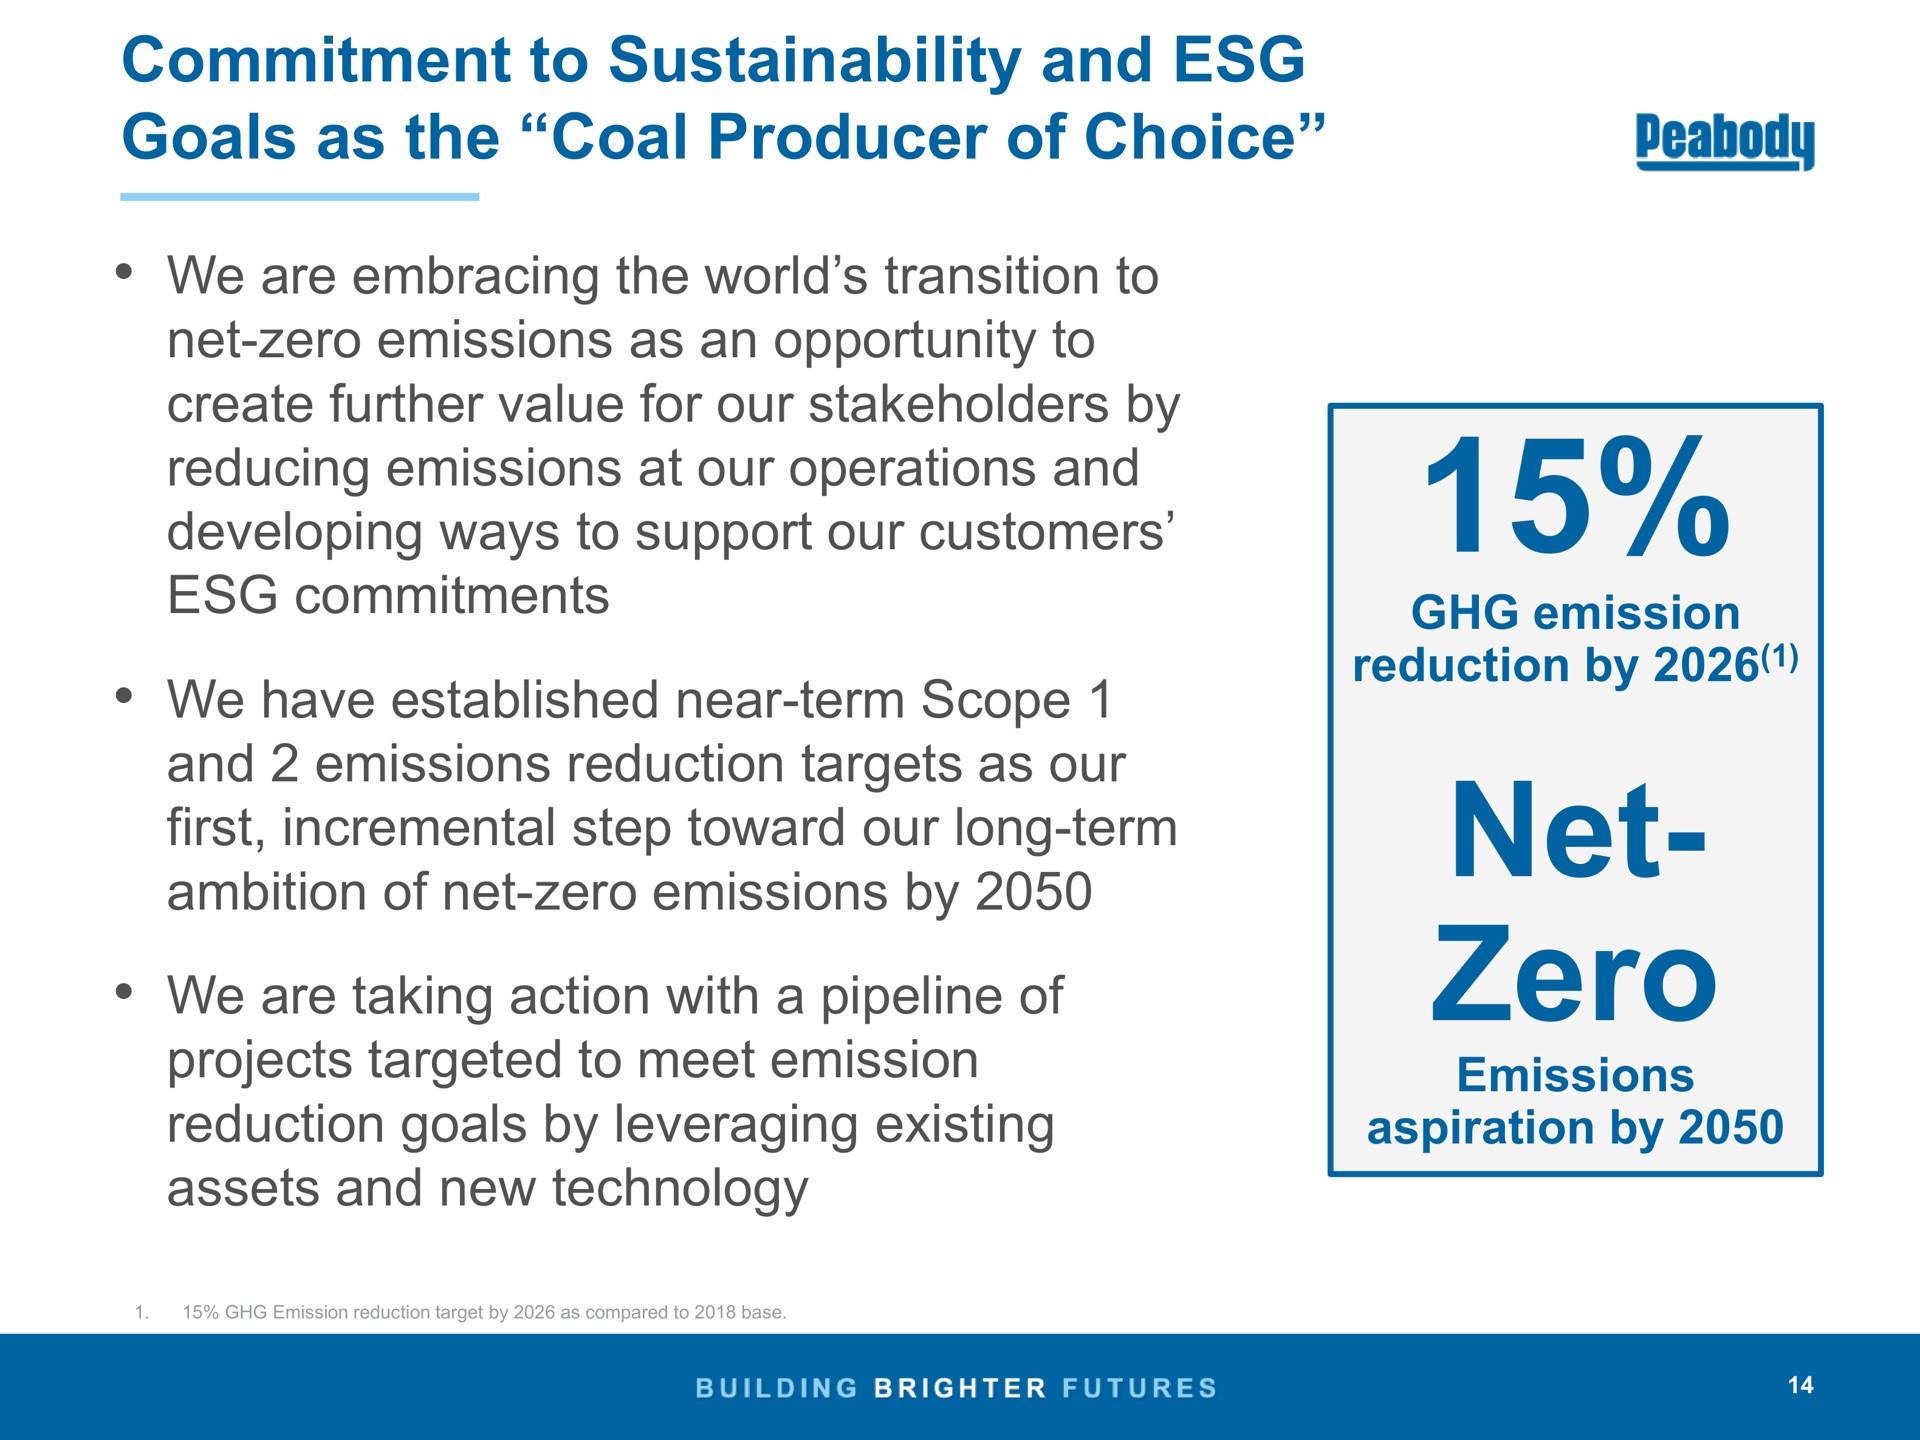 commitment to and goals as the coal producer of choice we are embracing the world transition to net zero emissions as an opportunity to create further value for our stakeholders by reducing emissions at our operations and developing ways to support our customers commitments we have established near term scope and emissions reduction targets as our first incremental step toward our long term ambition of net zero emissions by we are taking action with a pipeline of projects targeted to meet emission reduction goals by leveraging existing assets and new technology emission reduction by net zero emissions aspiration by | Peabody Energy